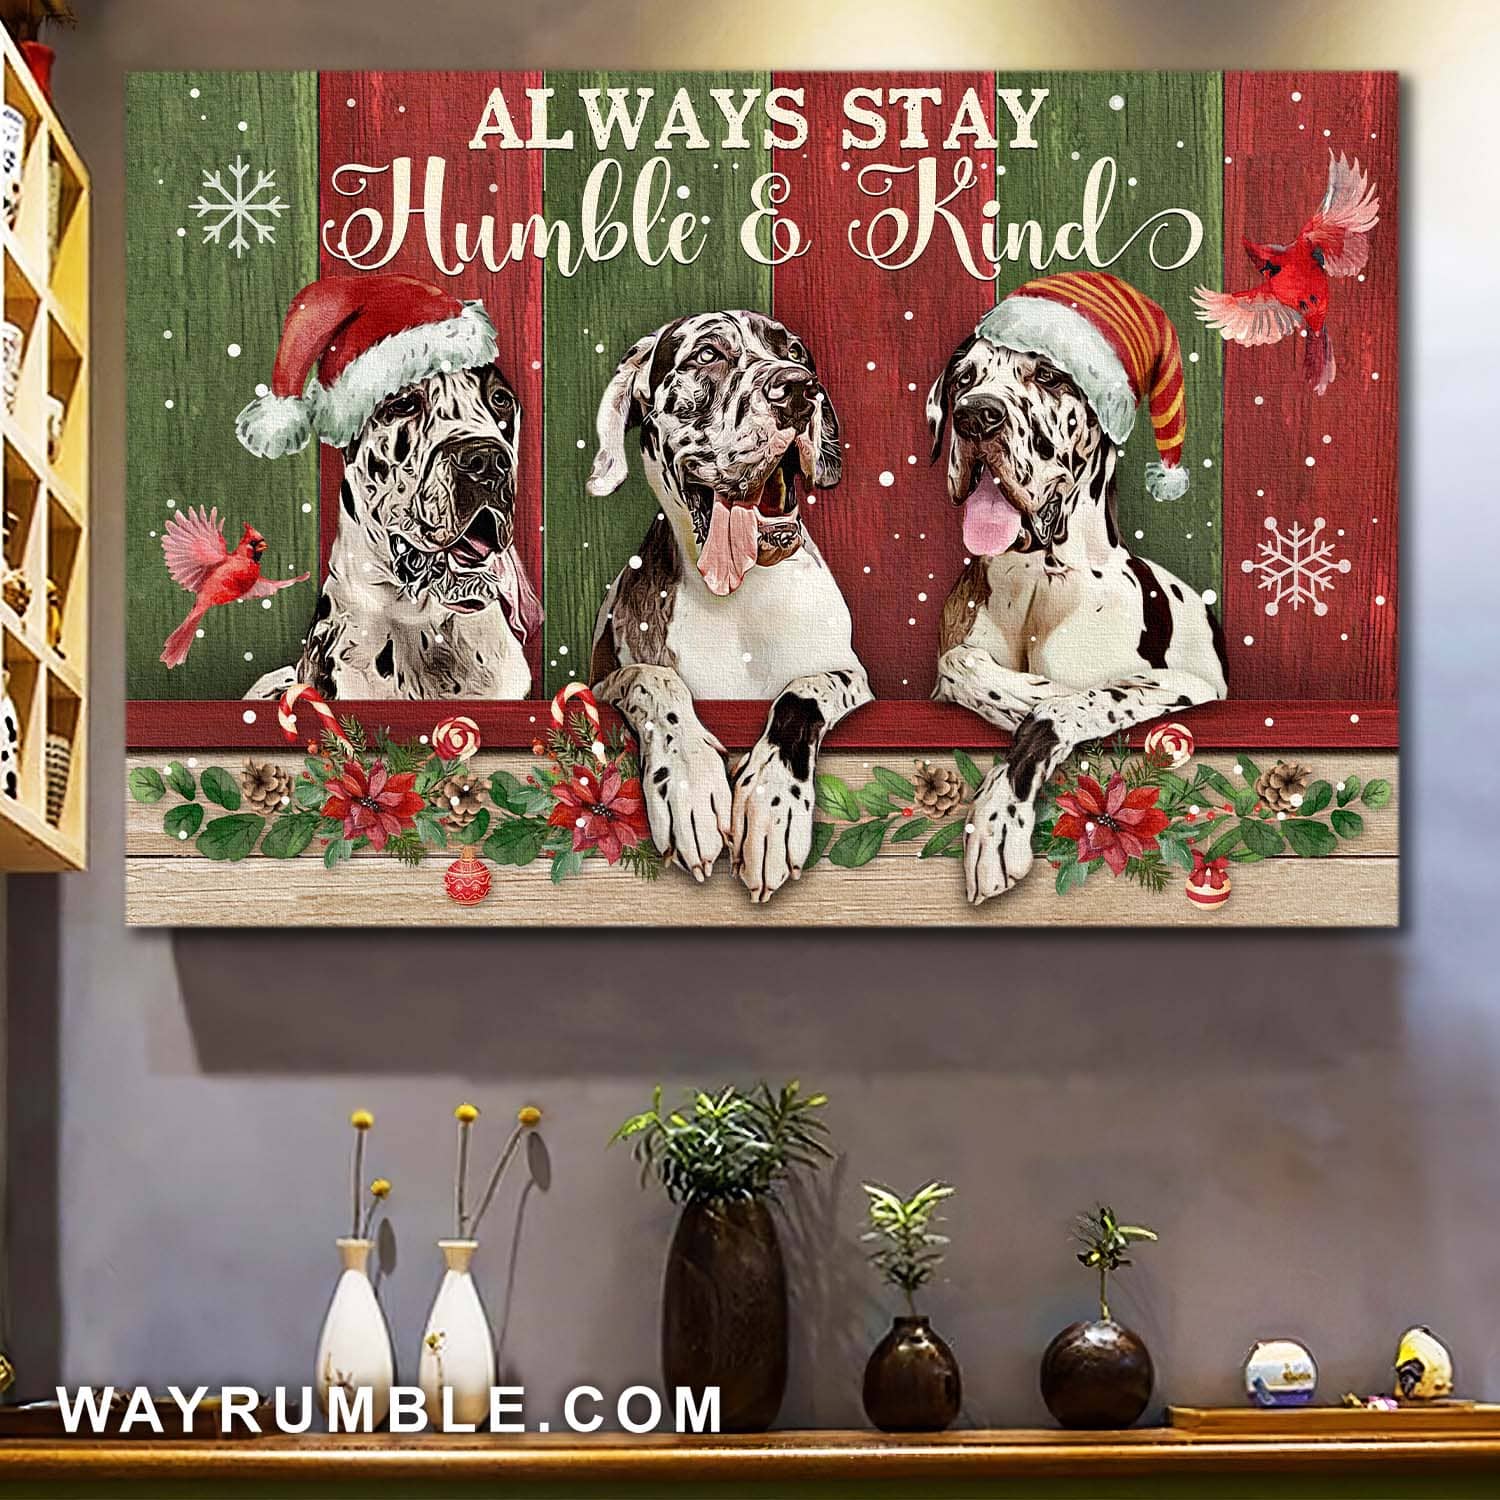 Great Dane, Cardinal, Christmas, Always stay humble and kind - Dog Landscape Canvas Prints, Wall Art